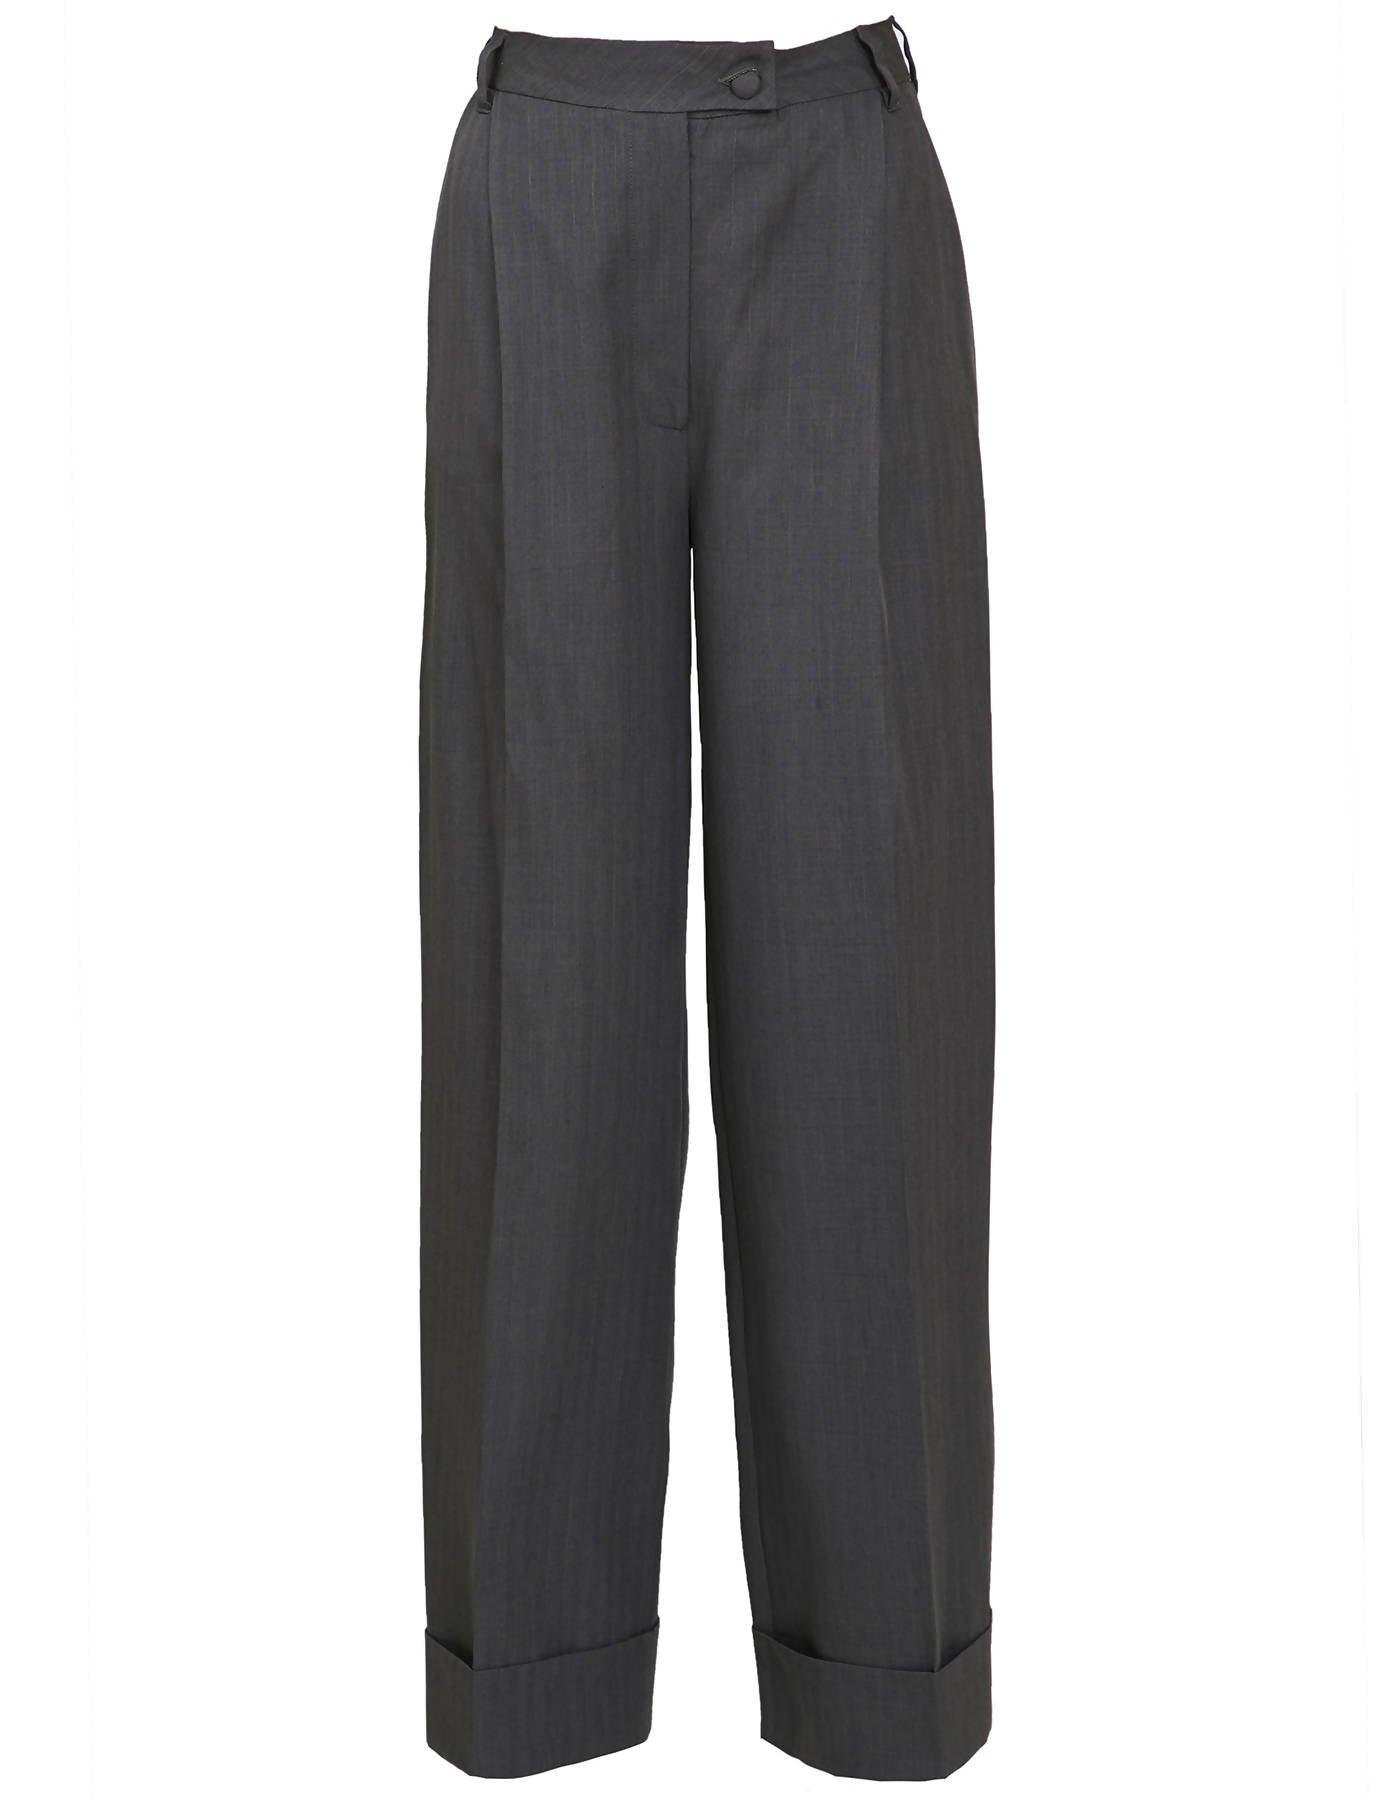 Gray Loose Suit Pants by BLIKVANGER